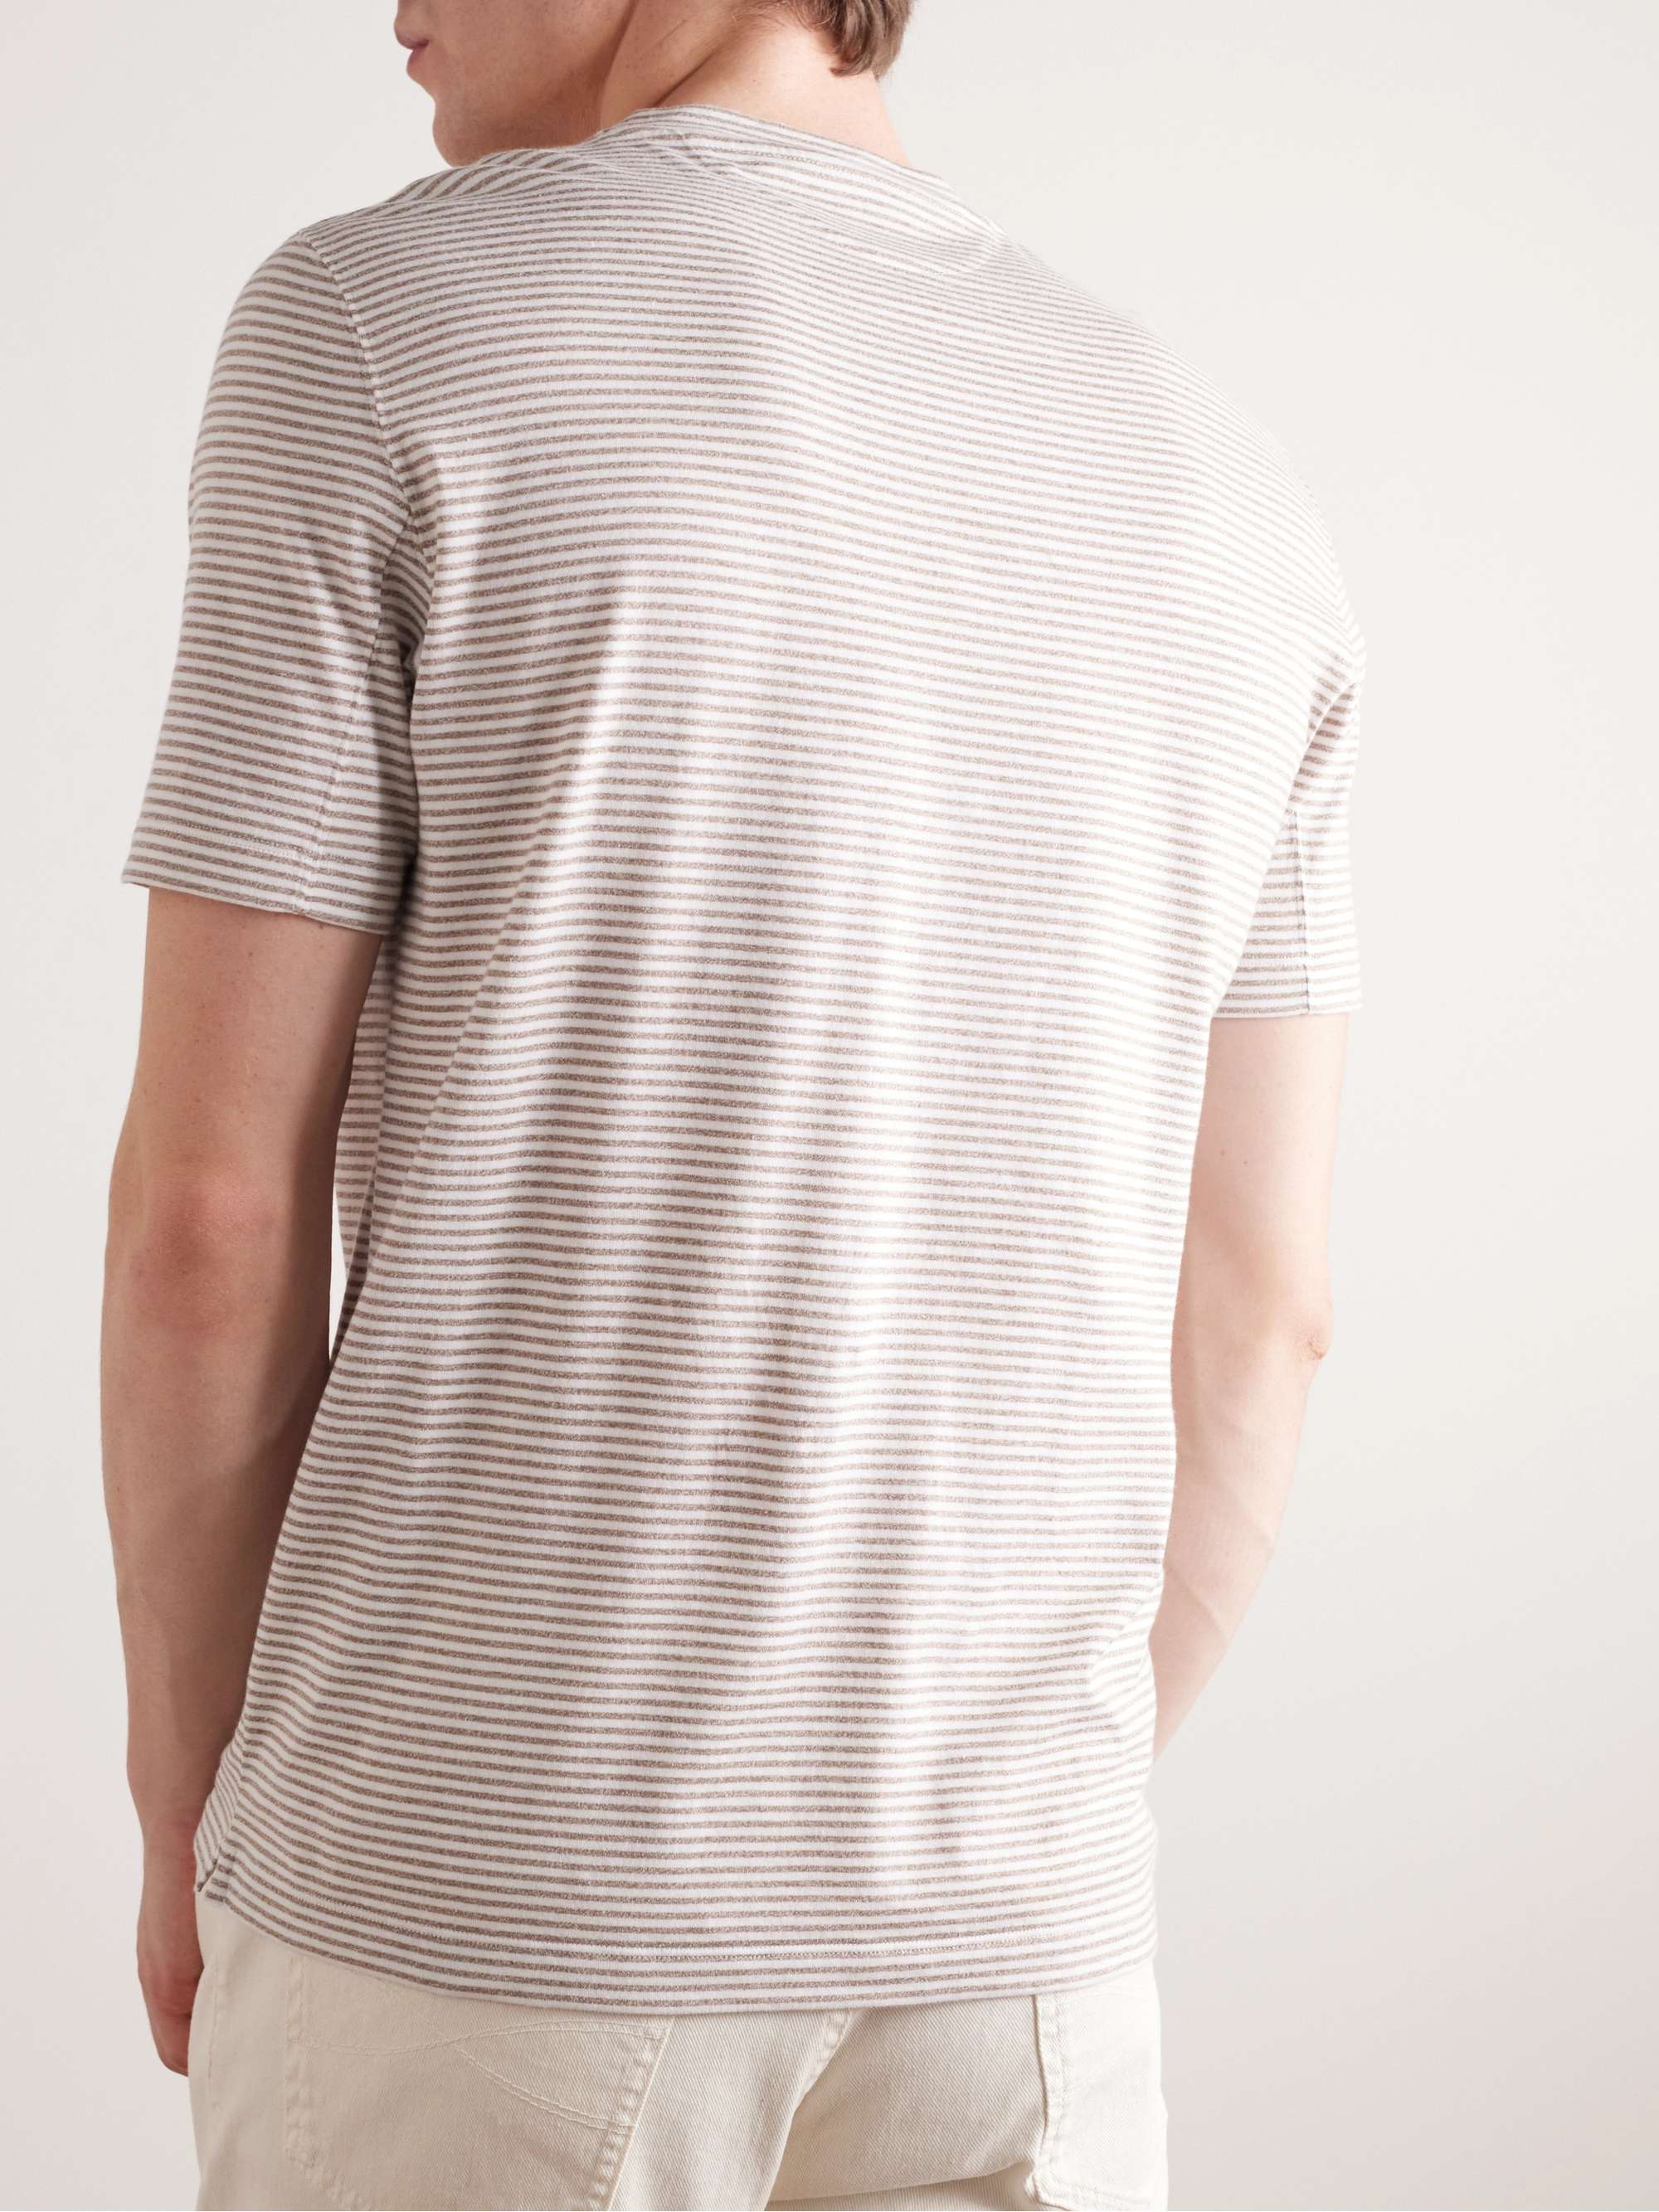 BRUNELLO CUCINELLI Striped Cotton and Linen-Blend Jersey T-Shirt for ...